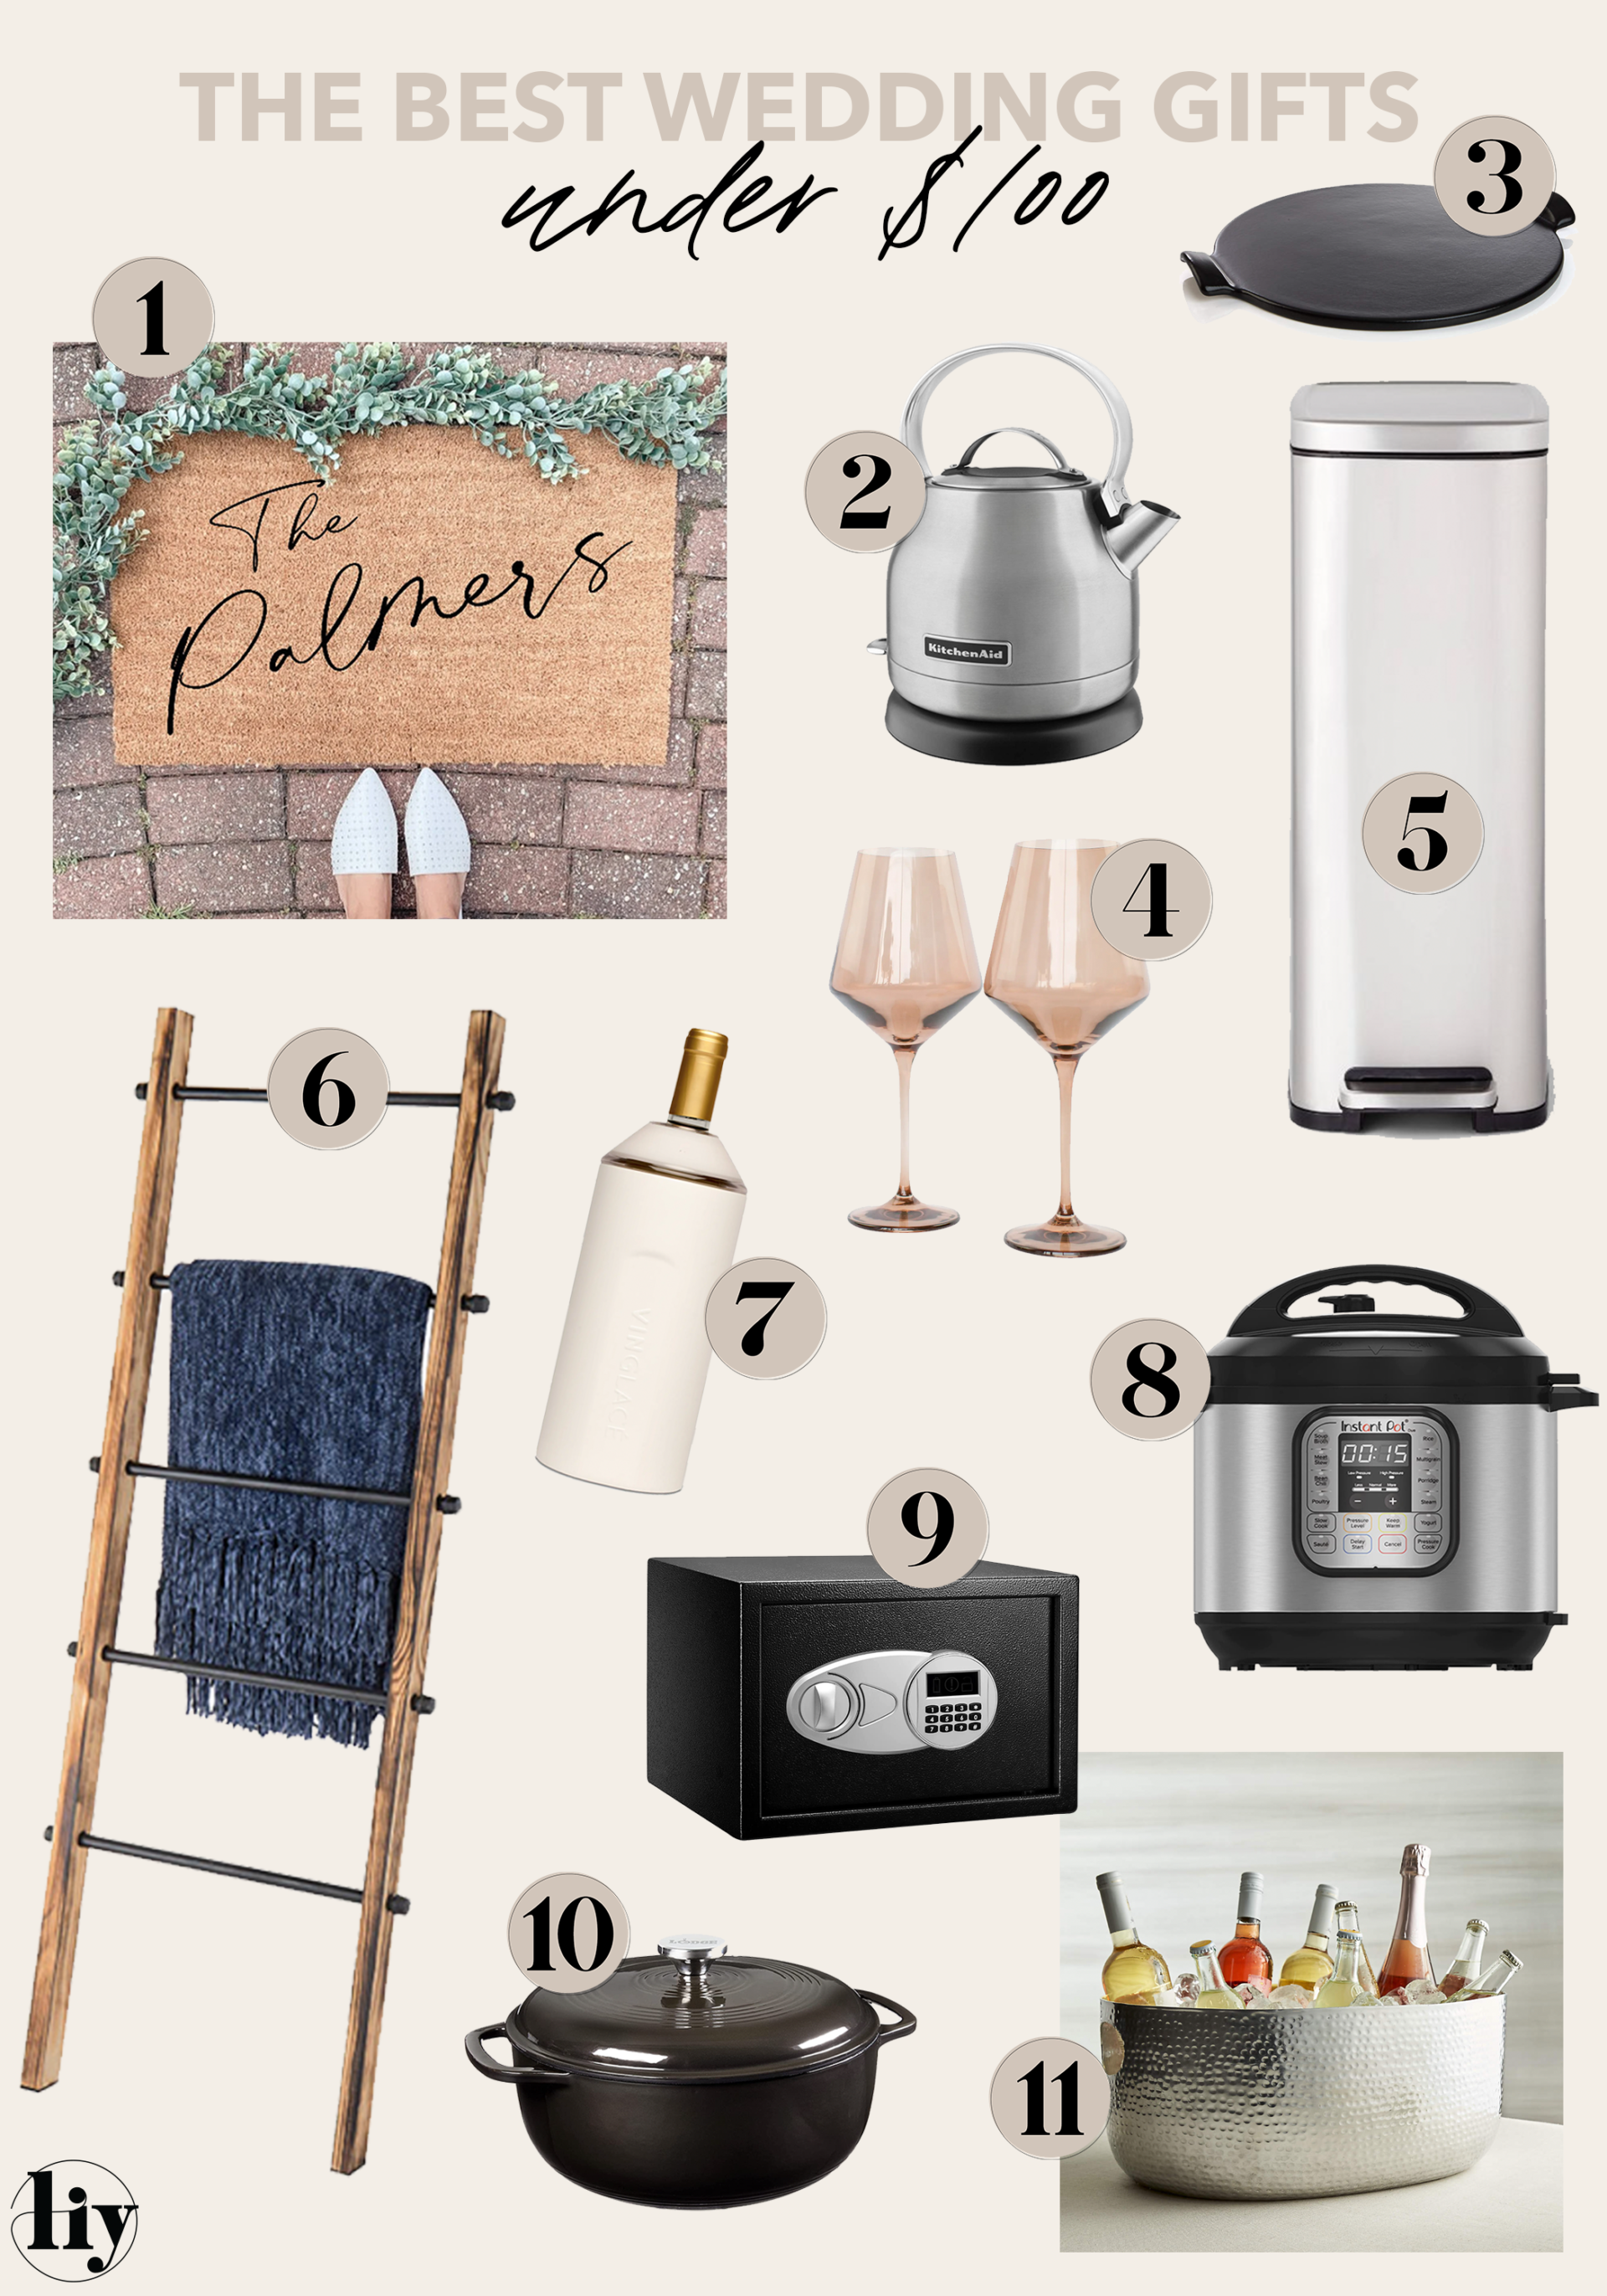 Wedding Registry Items You'll Actually Use! - Collections By Cailey